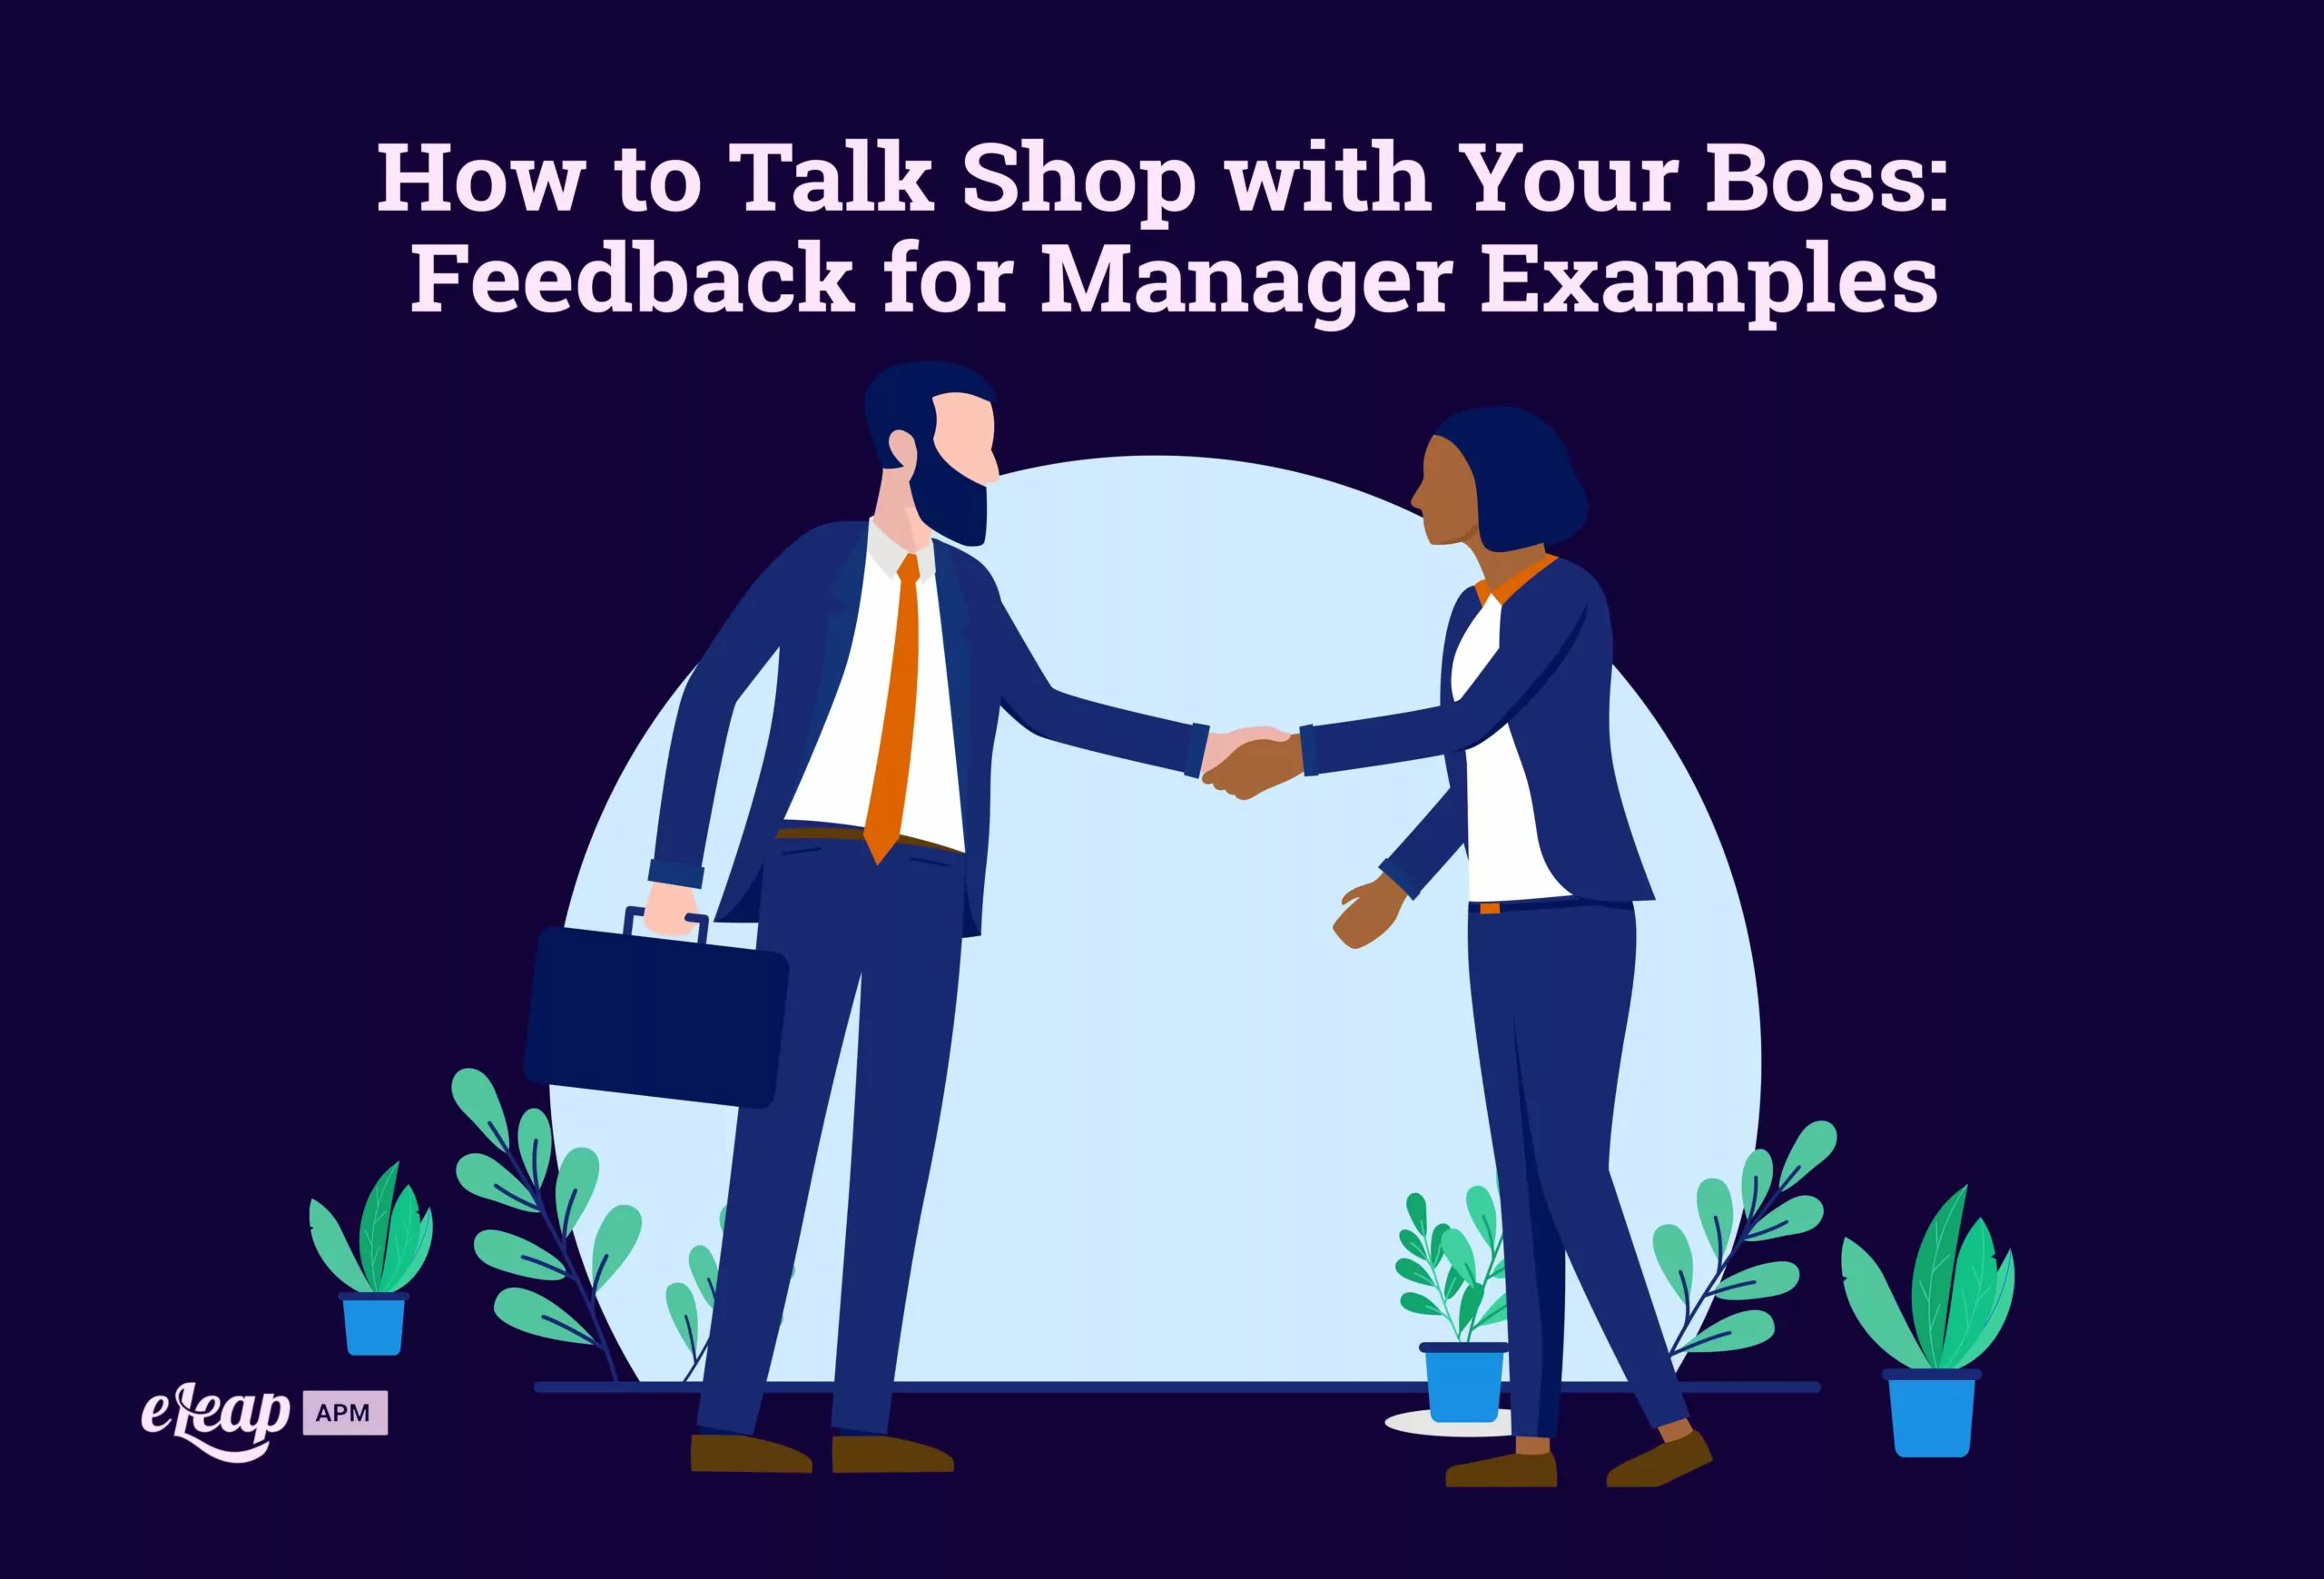 How to Talk Shop with Your Boss: Feedback for Manager Examples